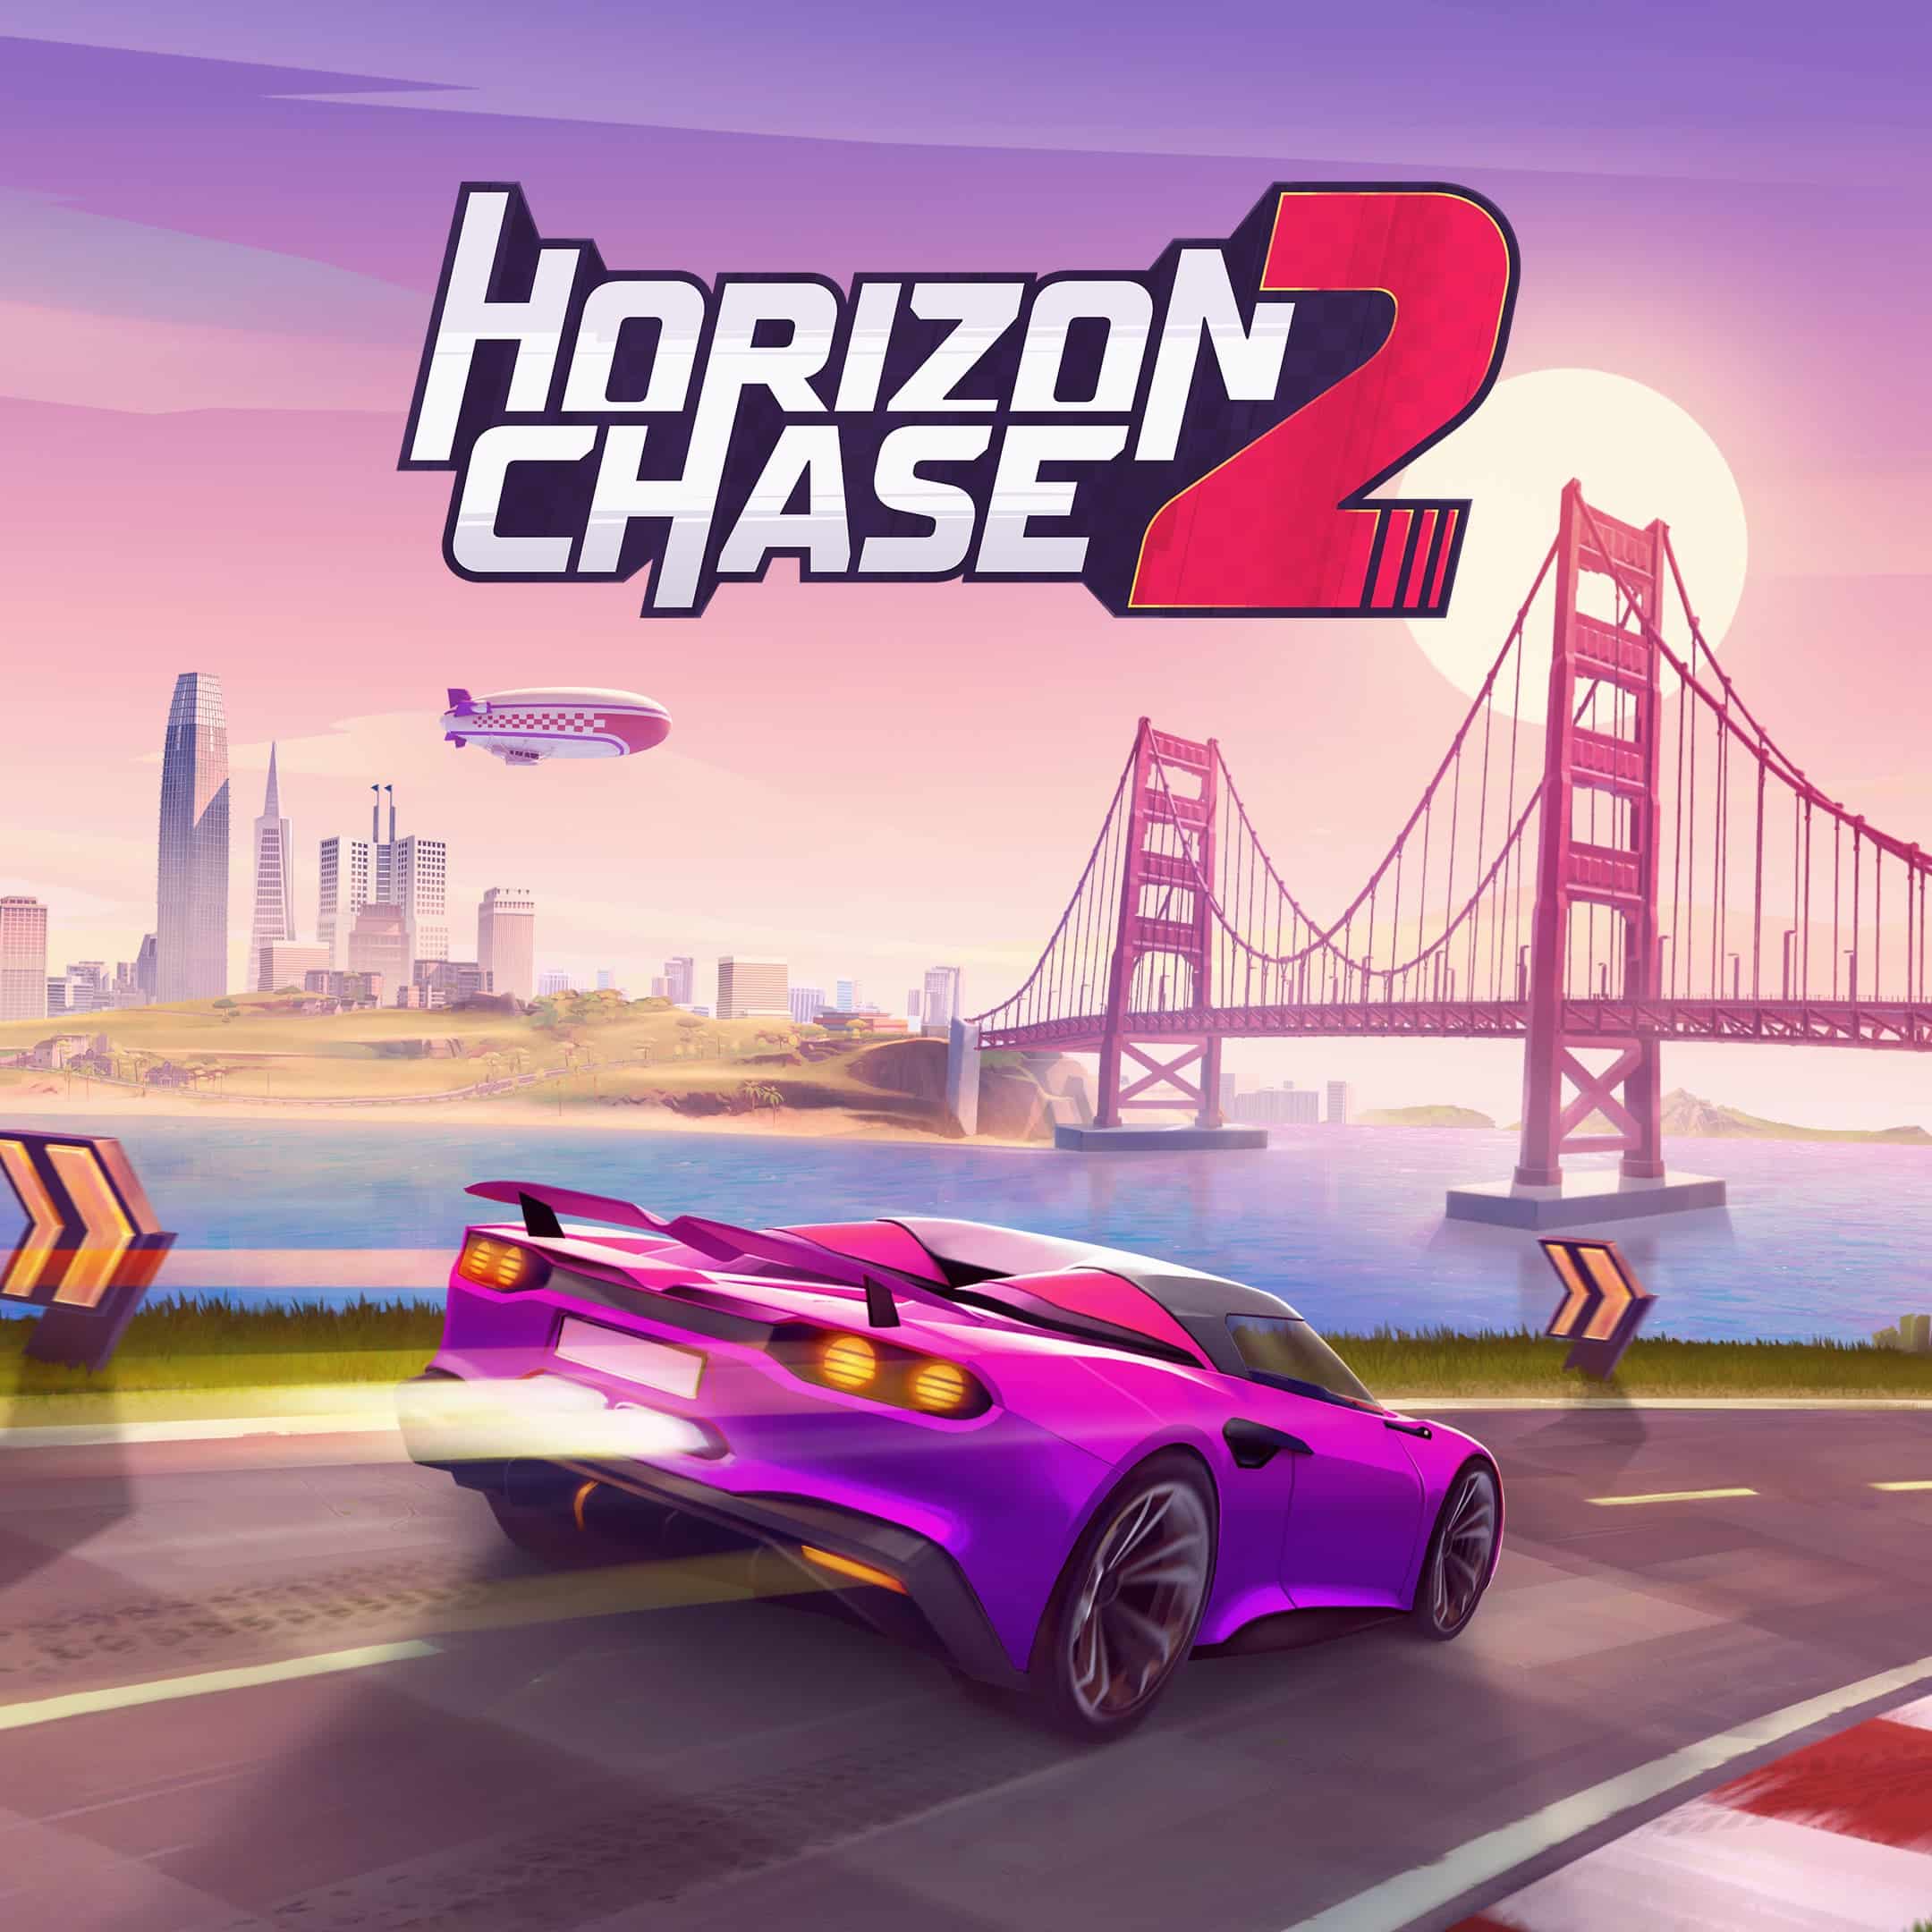 Horizon Chase 2 player count stats